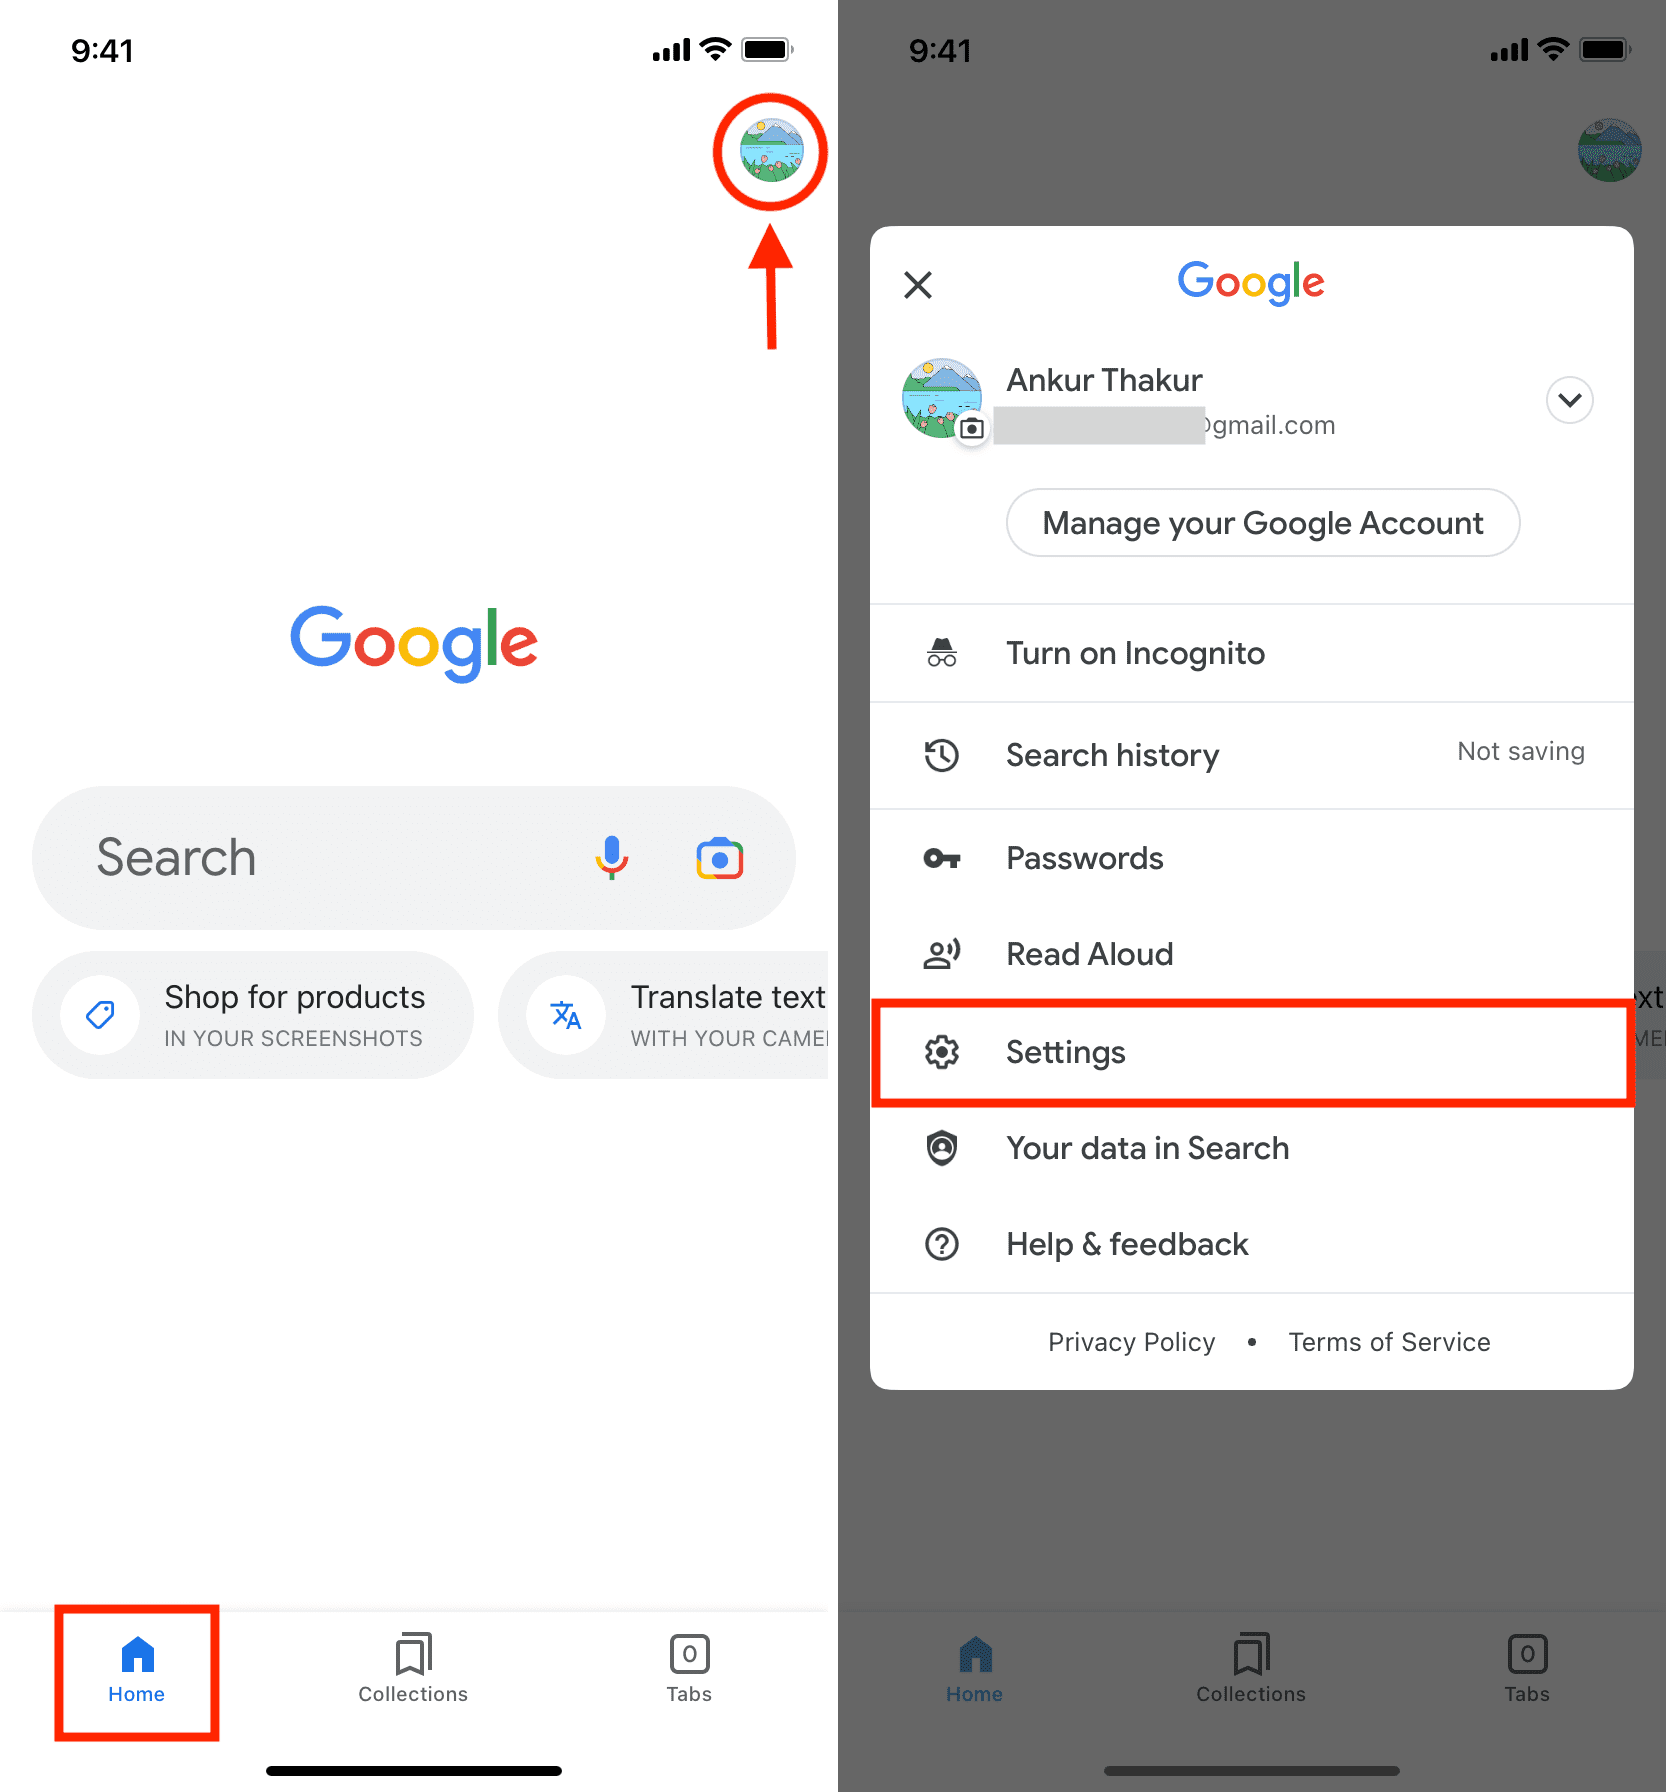 Access settings in Google app on iPhone